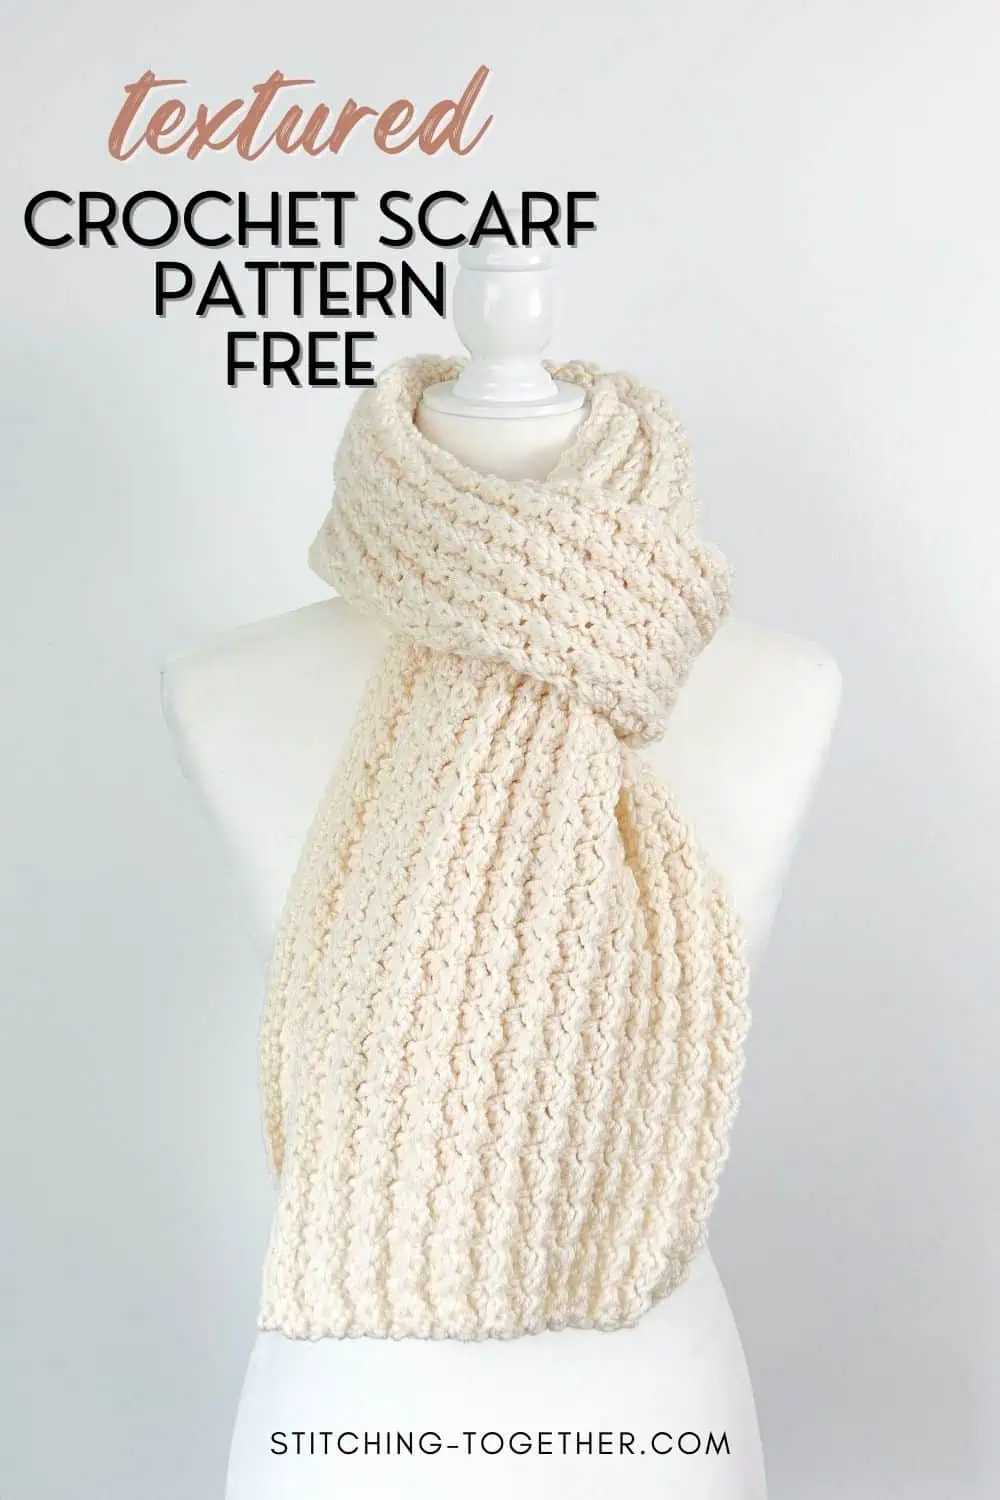 cream colored crochet scarf on a mannequin with text overlay reading "textured crochet scarf pattern free"